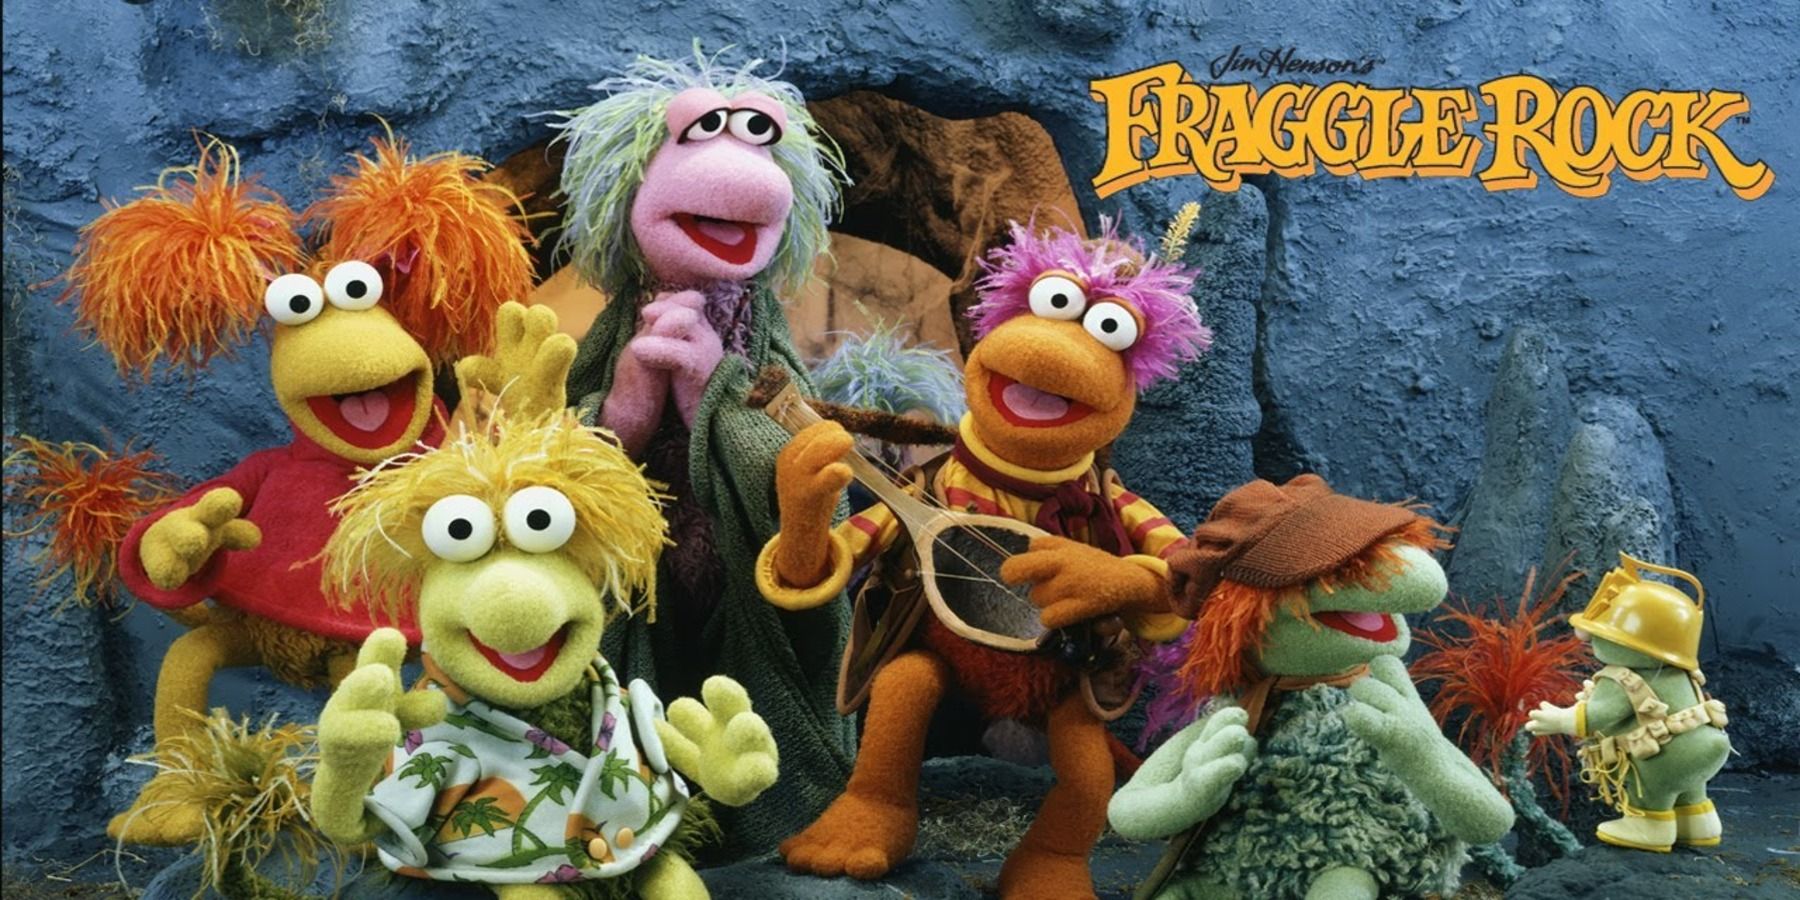 fraggle rock back to the rock apple tv plus